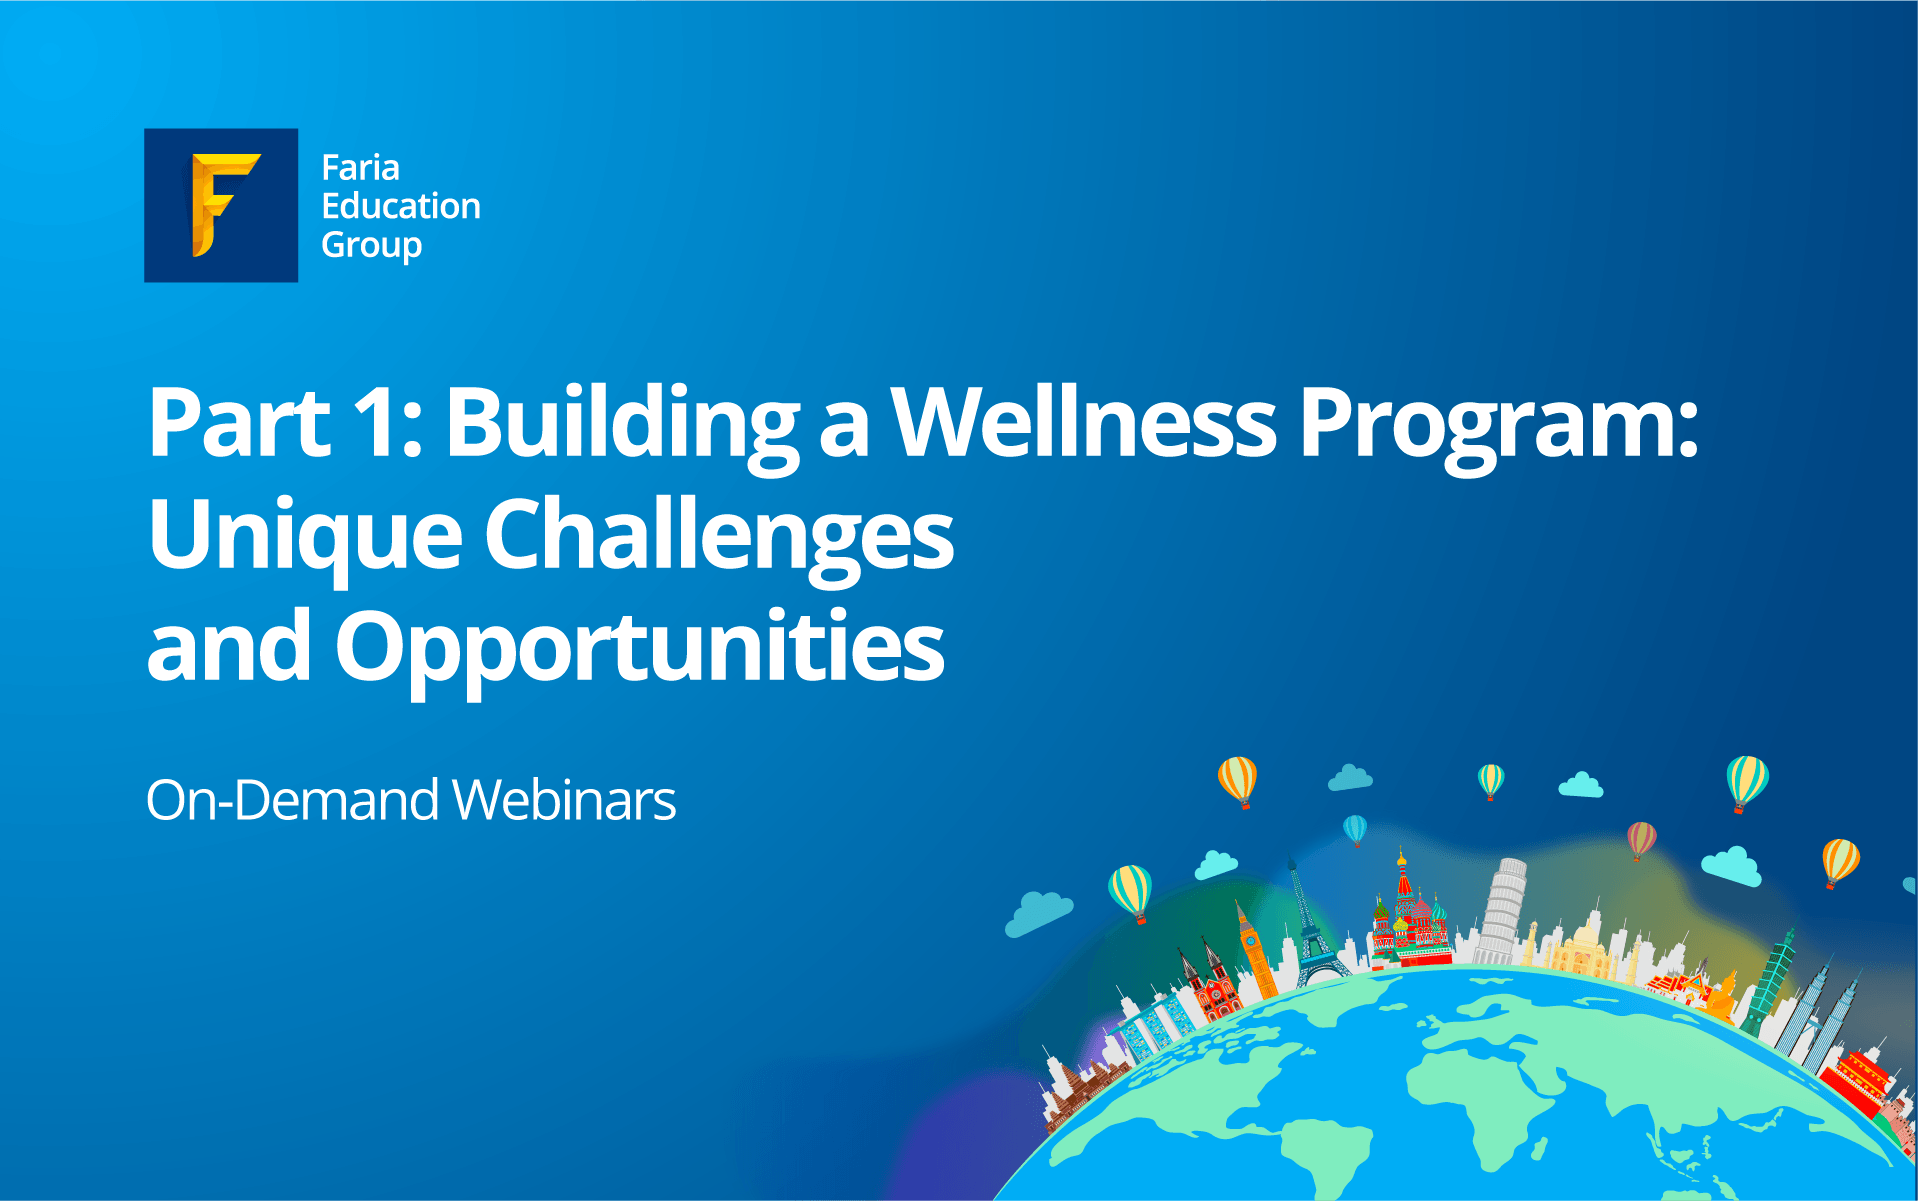 Part 1: Building a Wellness Program: Unique Challenges and Opportunities